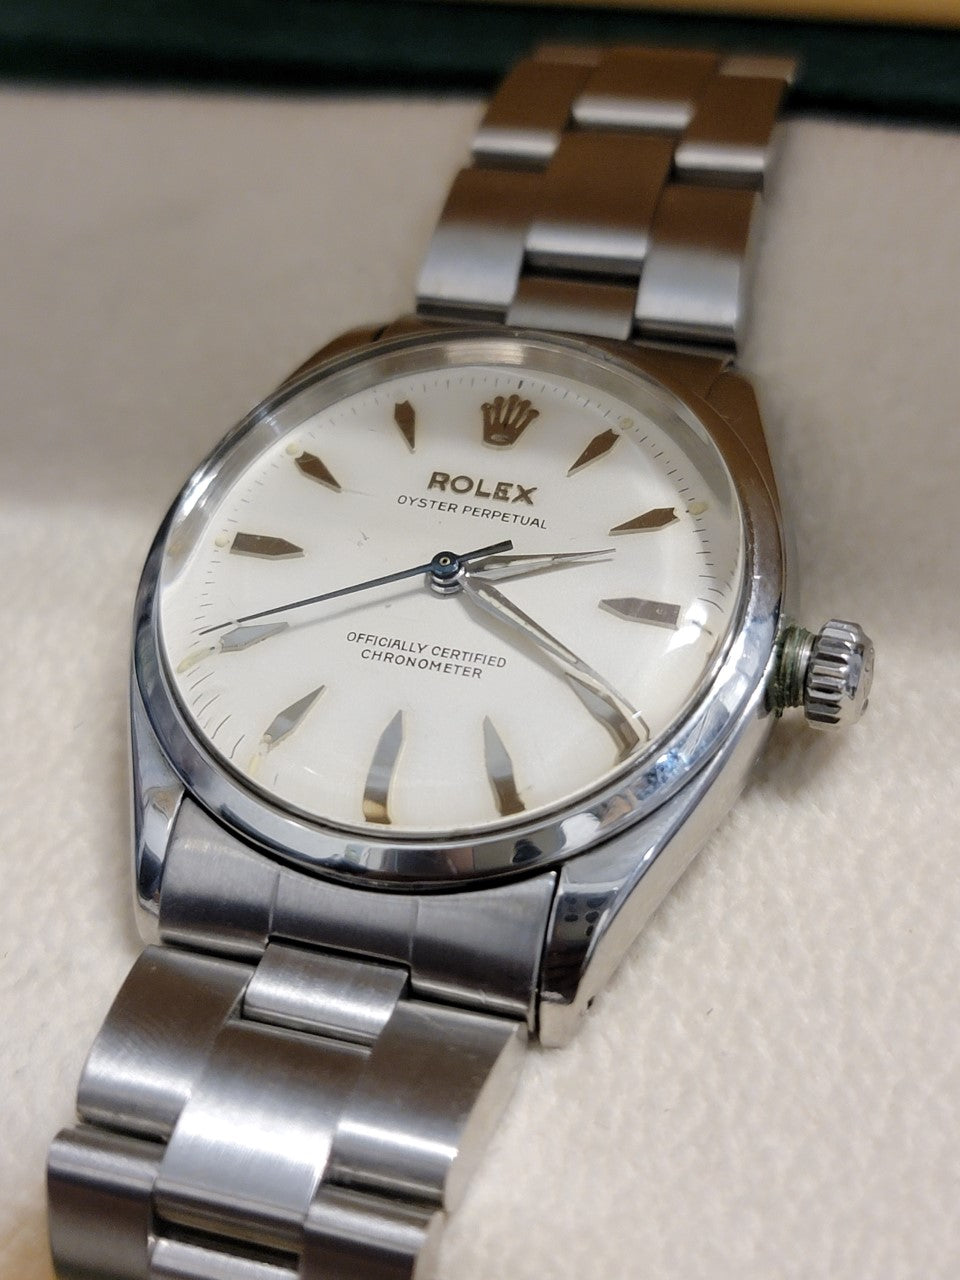 ROLEX c. Oyster Perpetual Watch